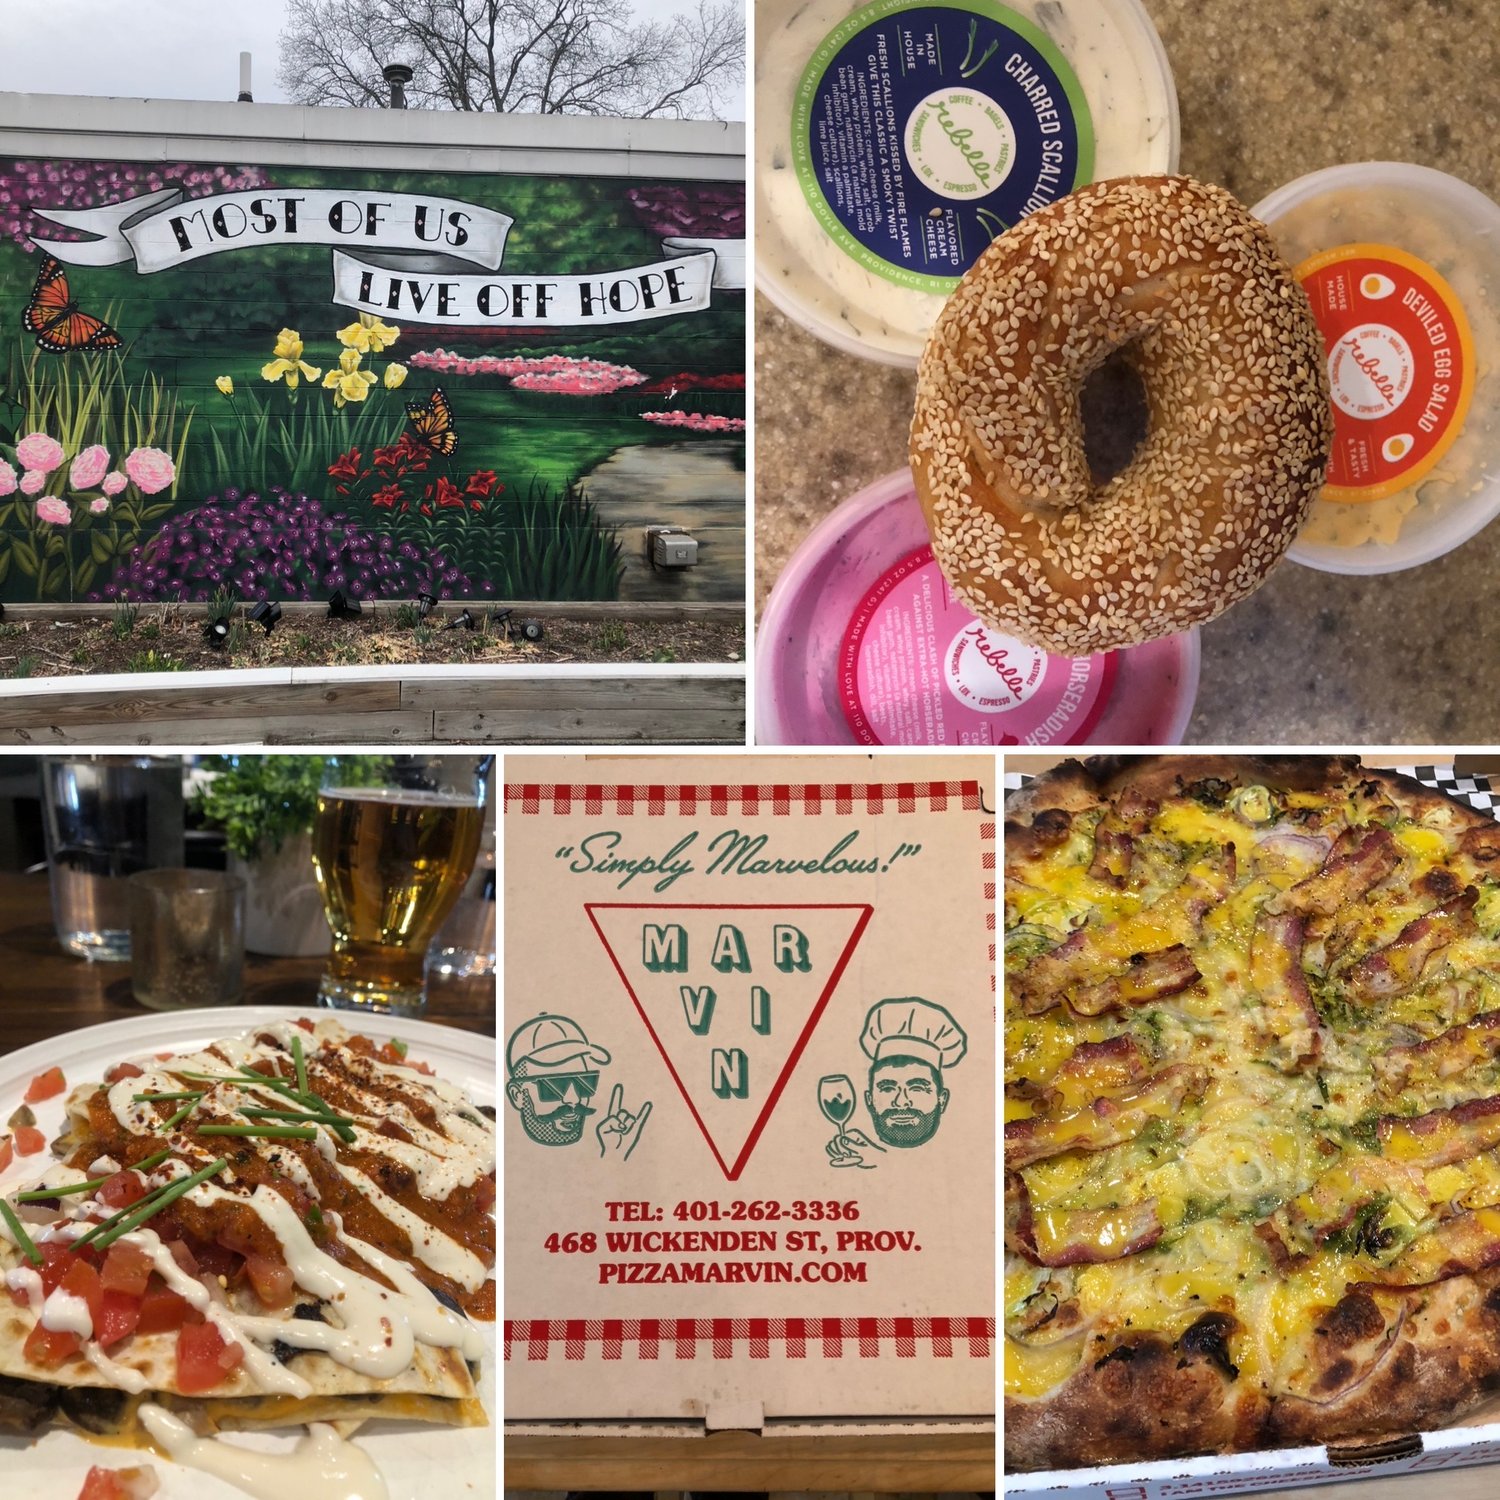 Clockwise from top left: A painted outdoor wall mural on Hope Street in Providence, R.I.; Assorted bagel spreads from Rebelle Artisan Bagels; A quesadilla topped with Vegan Cashew Crema from Besina restaurant in Plant City; A Pizza Marvin take-out pizza box; Pizza Marvin’s Carbonara Pizza with Brussels sprouts, pancetta, egg and pecorino.